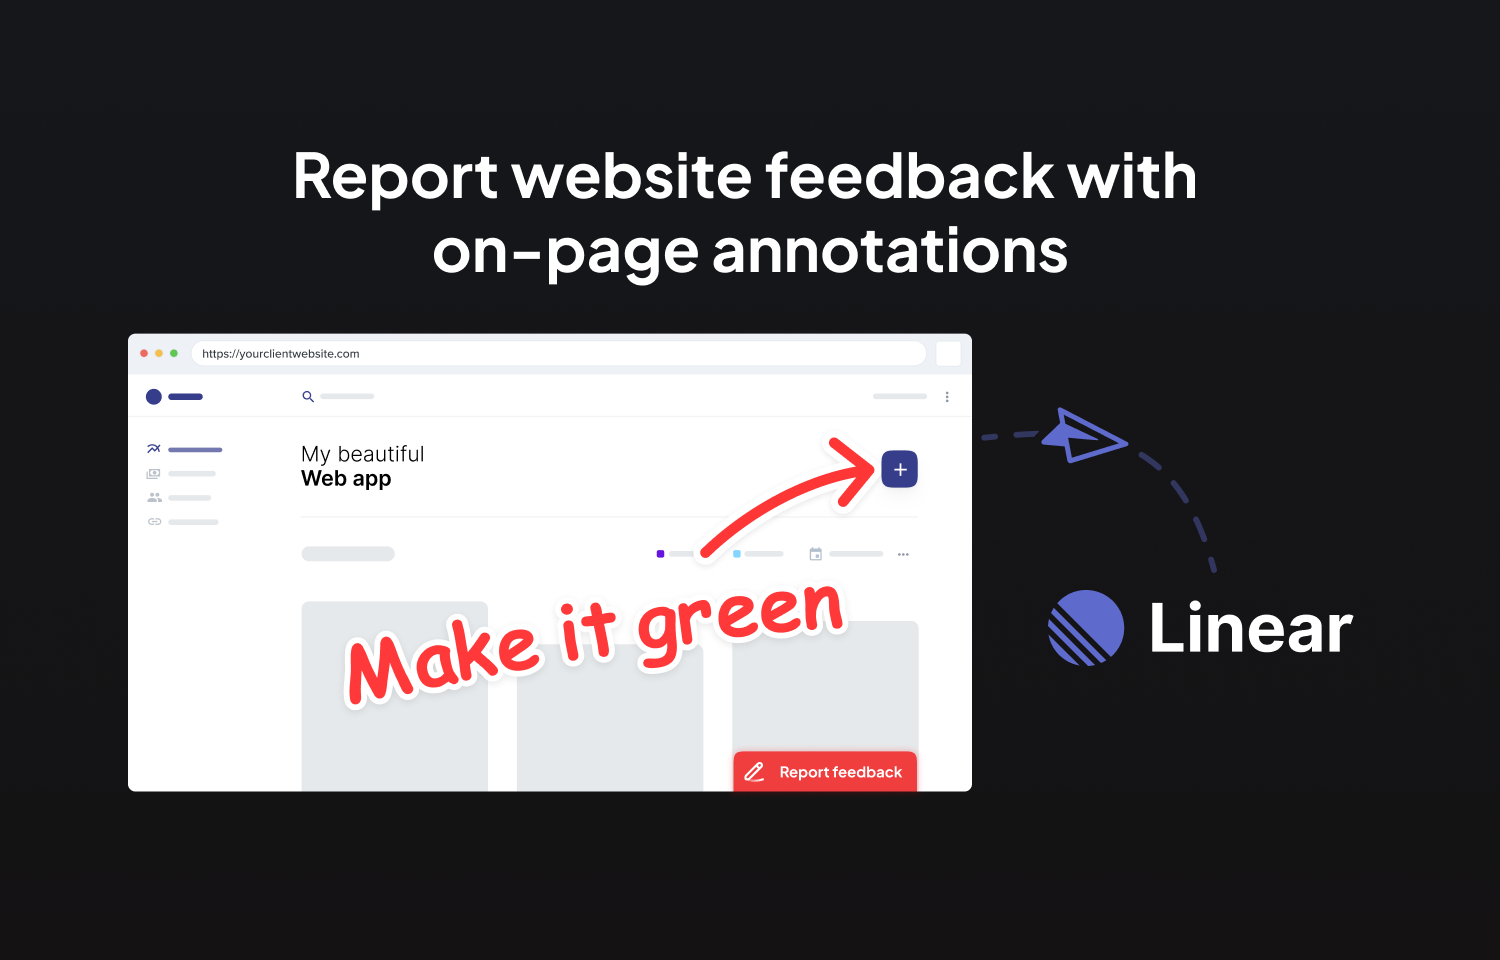 Report website feedback to Linear with on-page annotations